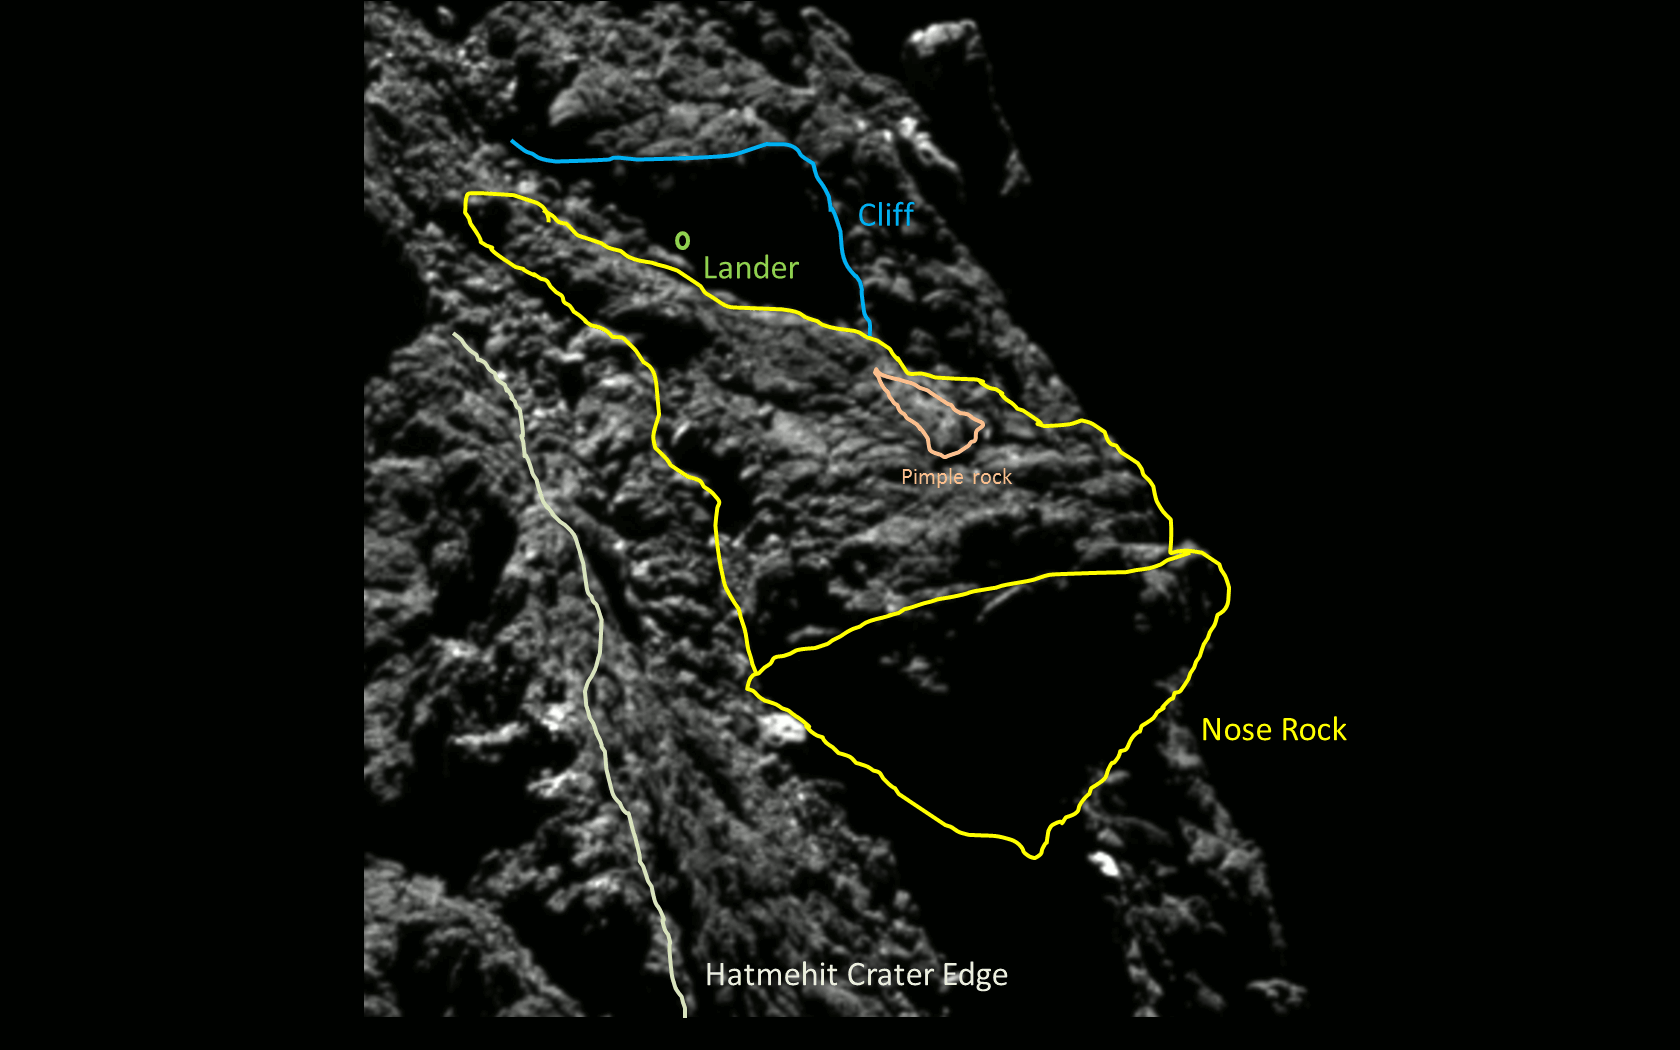 The challenges of trying to get the right perspective, taking into account illumination and local topography constraints such as the ‘nose rock’ or the edge of the Hatmehit ‘crater’. Credits: Images: ESA/Rosetta/MPS for OSIRIS Team MPS/UPD/LAM/IAA/SSO/INTA/UPM/DASP/IDA; Lander search analysis: L. O’Rourke 